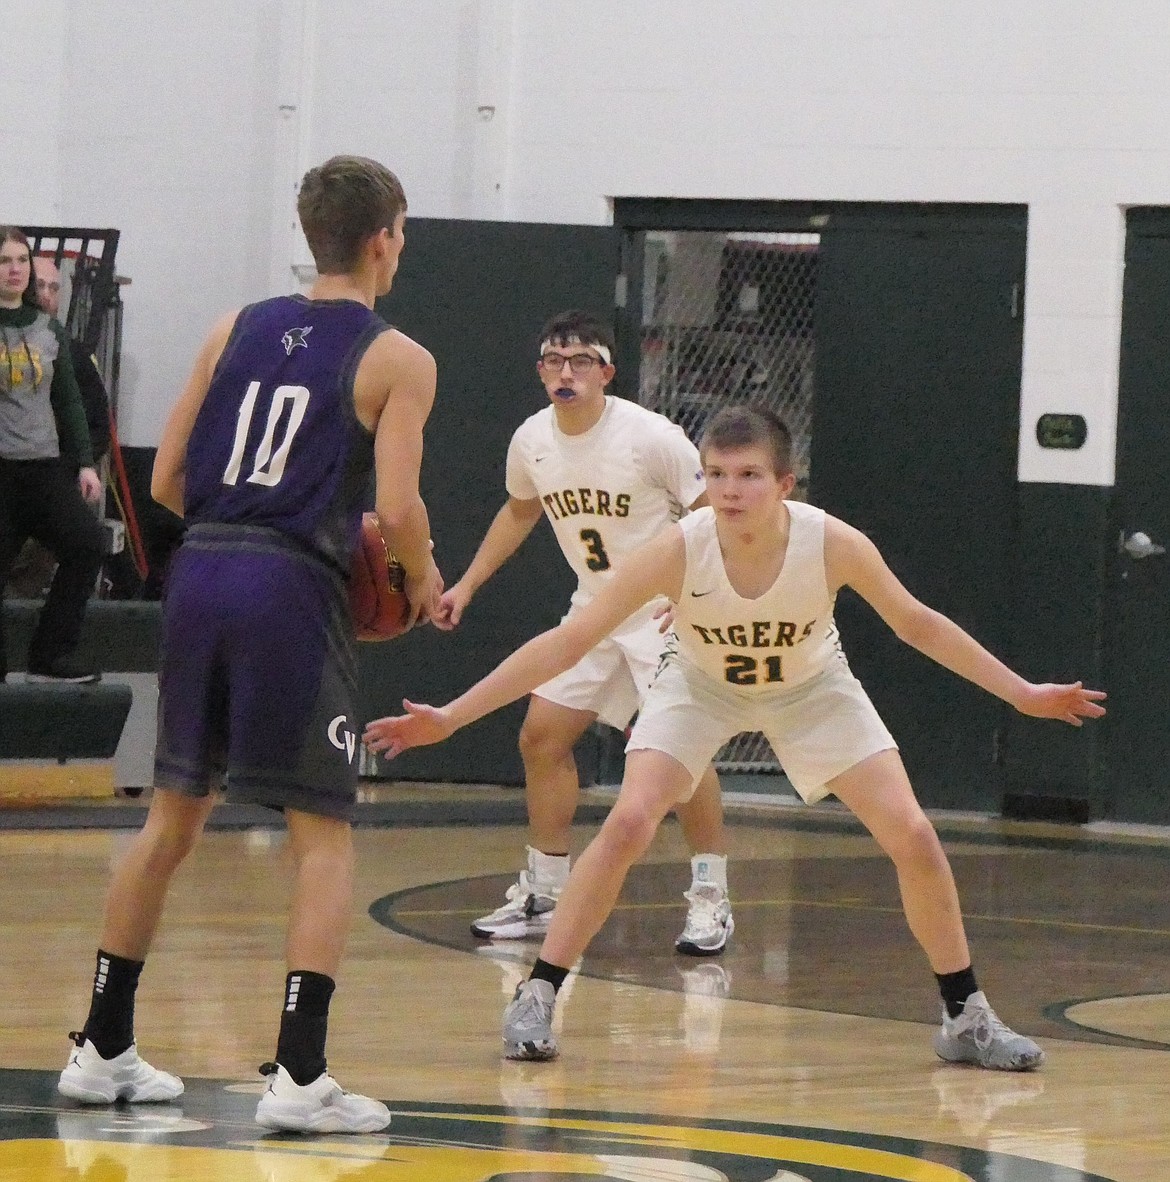 St. Regis guard/forward Colton Todd defends against Charlo senior Hayden Hollow (10) during their game Friday night in St. Regis, won by the Tigers 67-44. (Chuck Bandel/MI-VP)